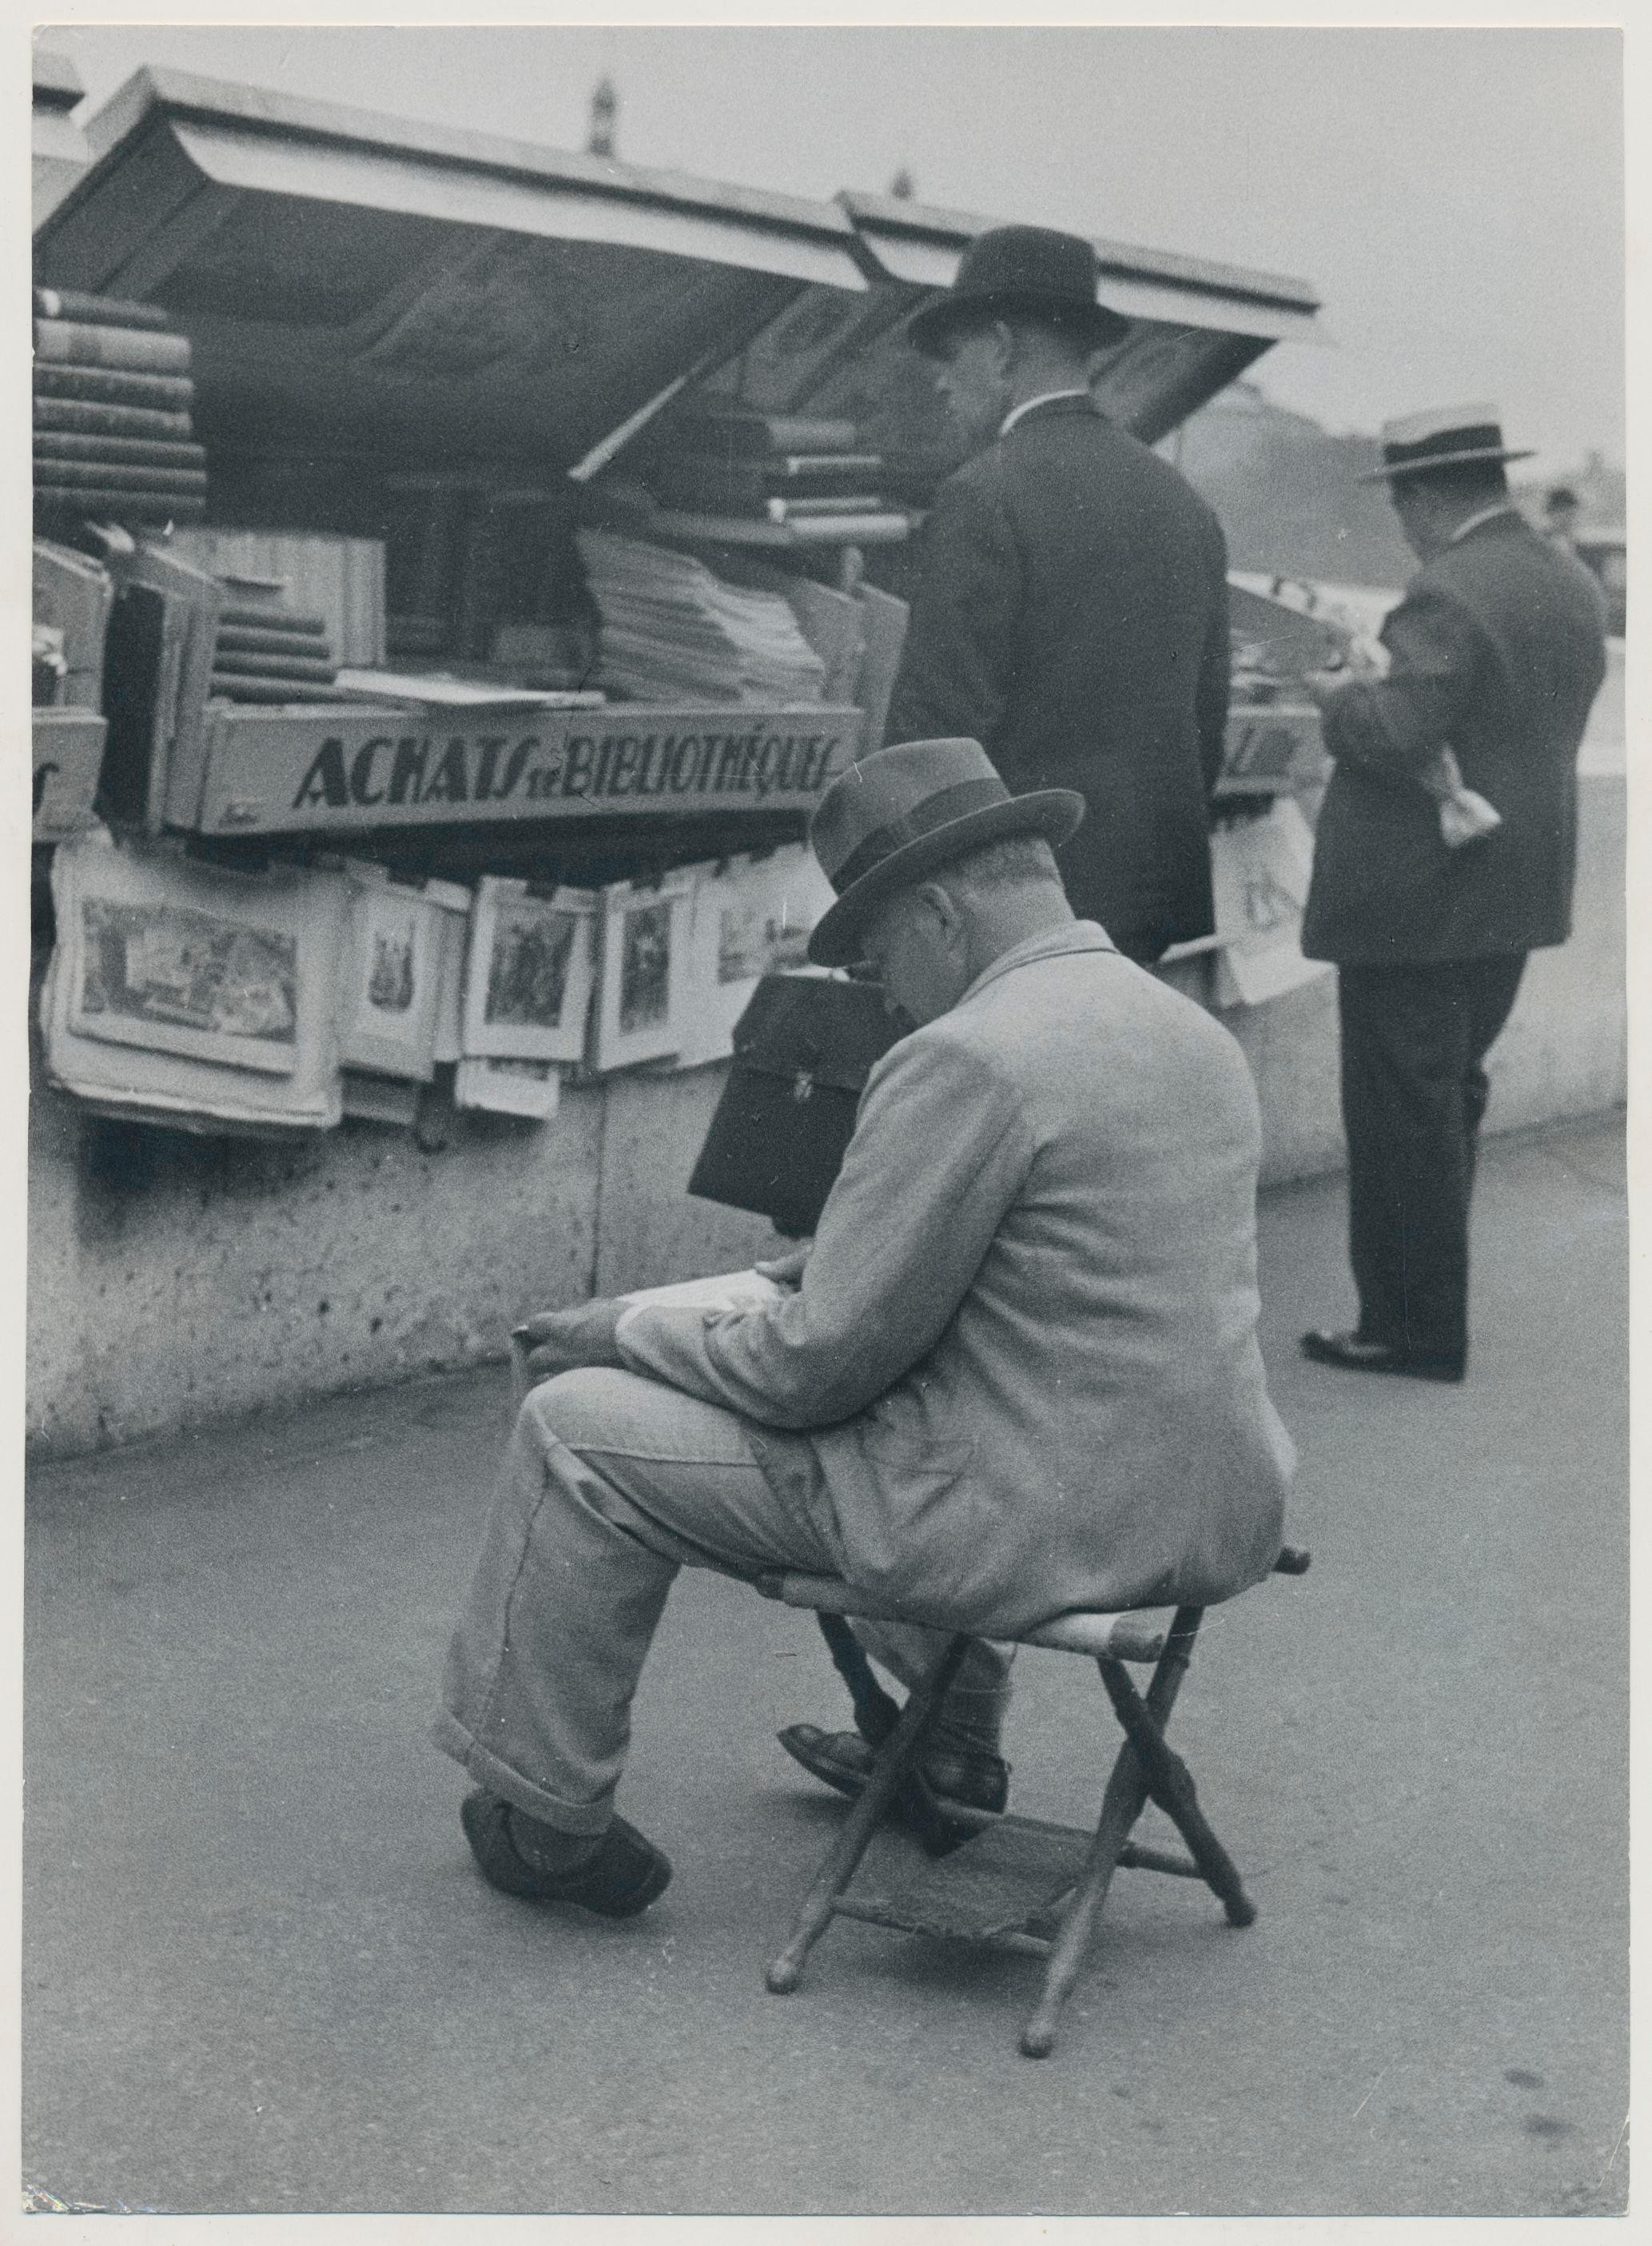 Erich Andres Black and White Photograph - Man, Market, Street Photography, Black and White, Paris, 1950s, 23 x 16, 8 cm